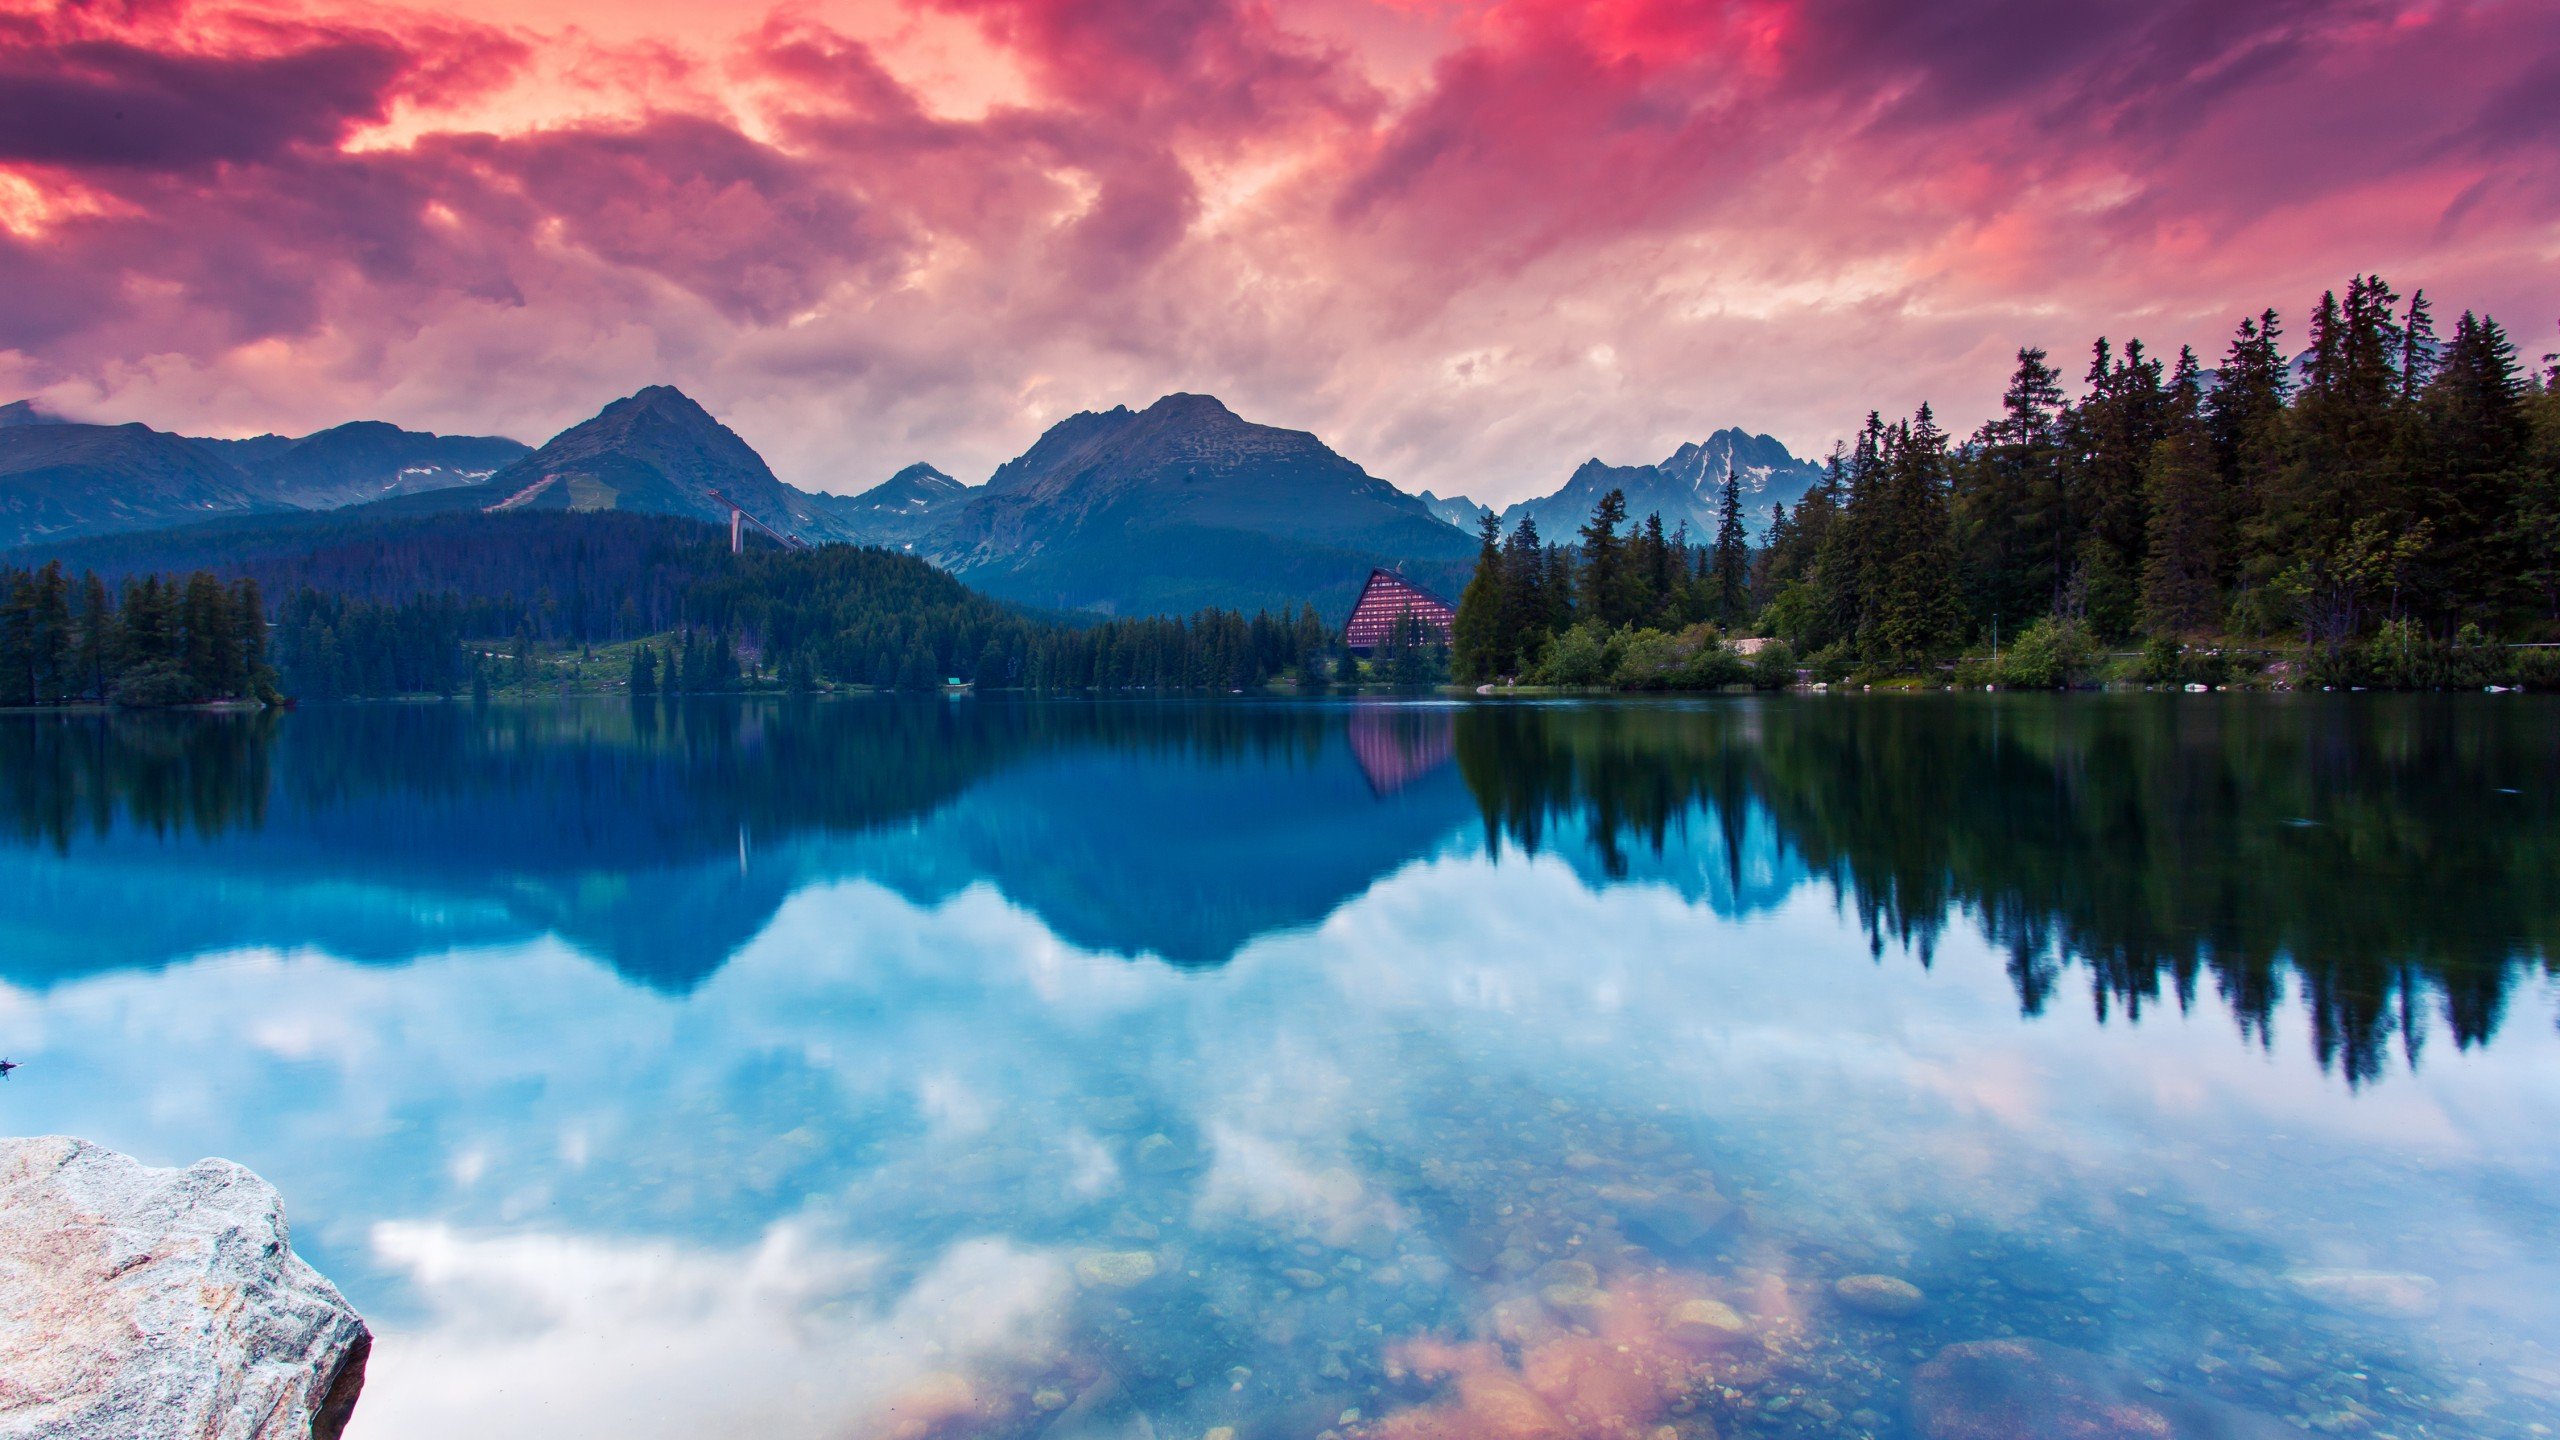 nature, Landscape, Mountains, Tatra Mountains, Slovakia, Snowy peak, Pine trees, Forest, Rock, Lake, Water, Hotel, Sunset, Clouds, Reflection, Trees, SkiJump Wallpaper